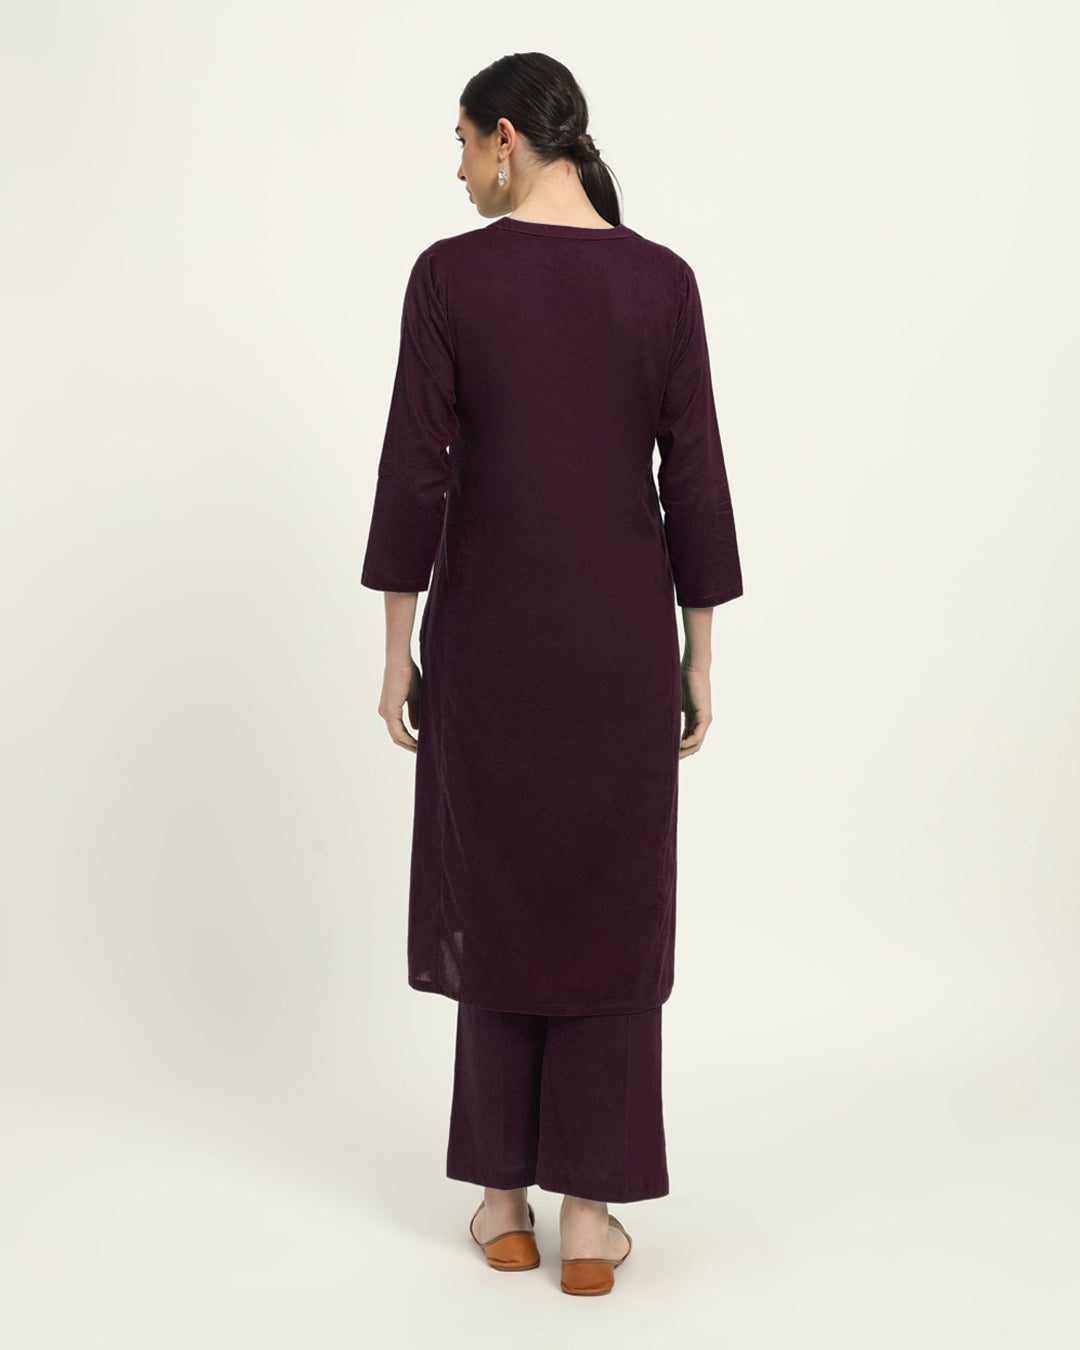 Plum Passion Everyday Bliss Notch Neck Solid Kurta (Without Bottoms)